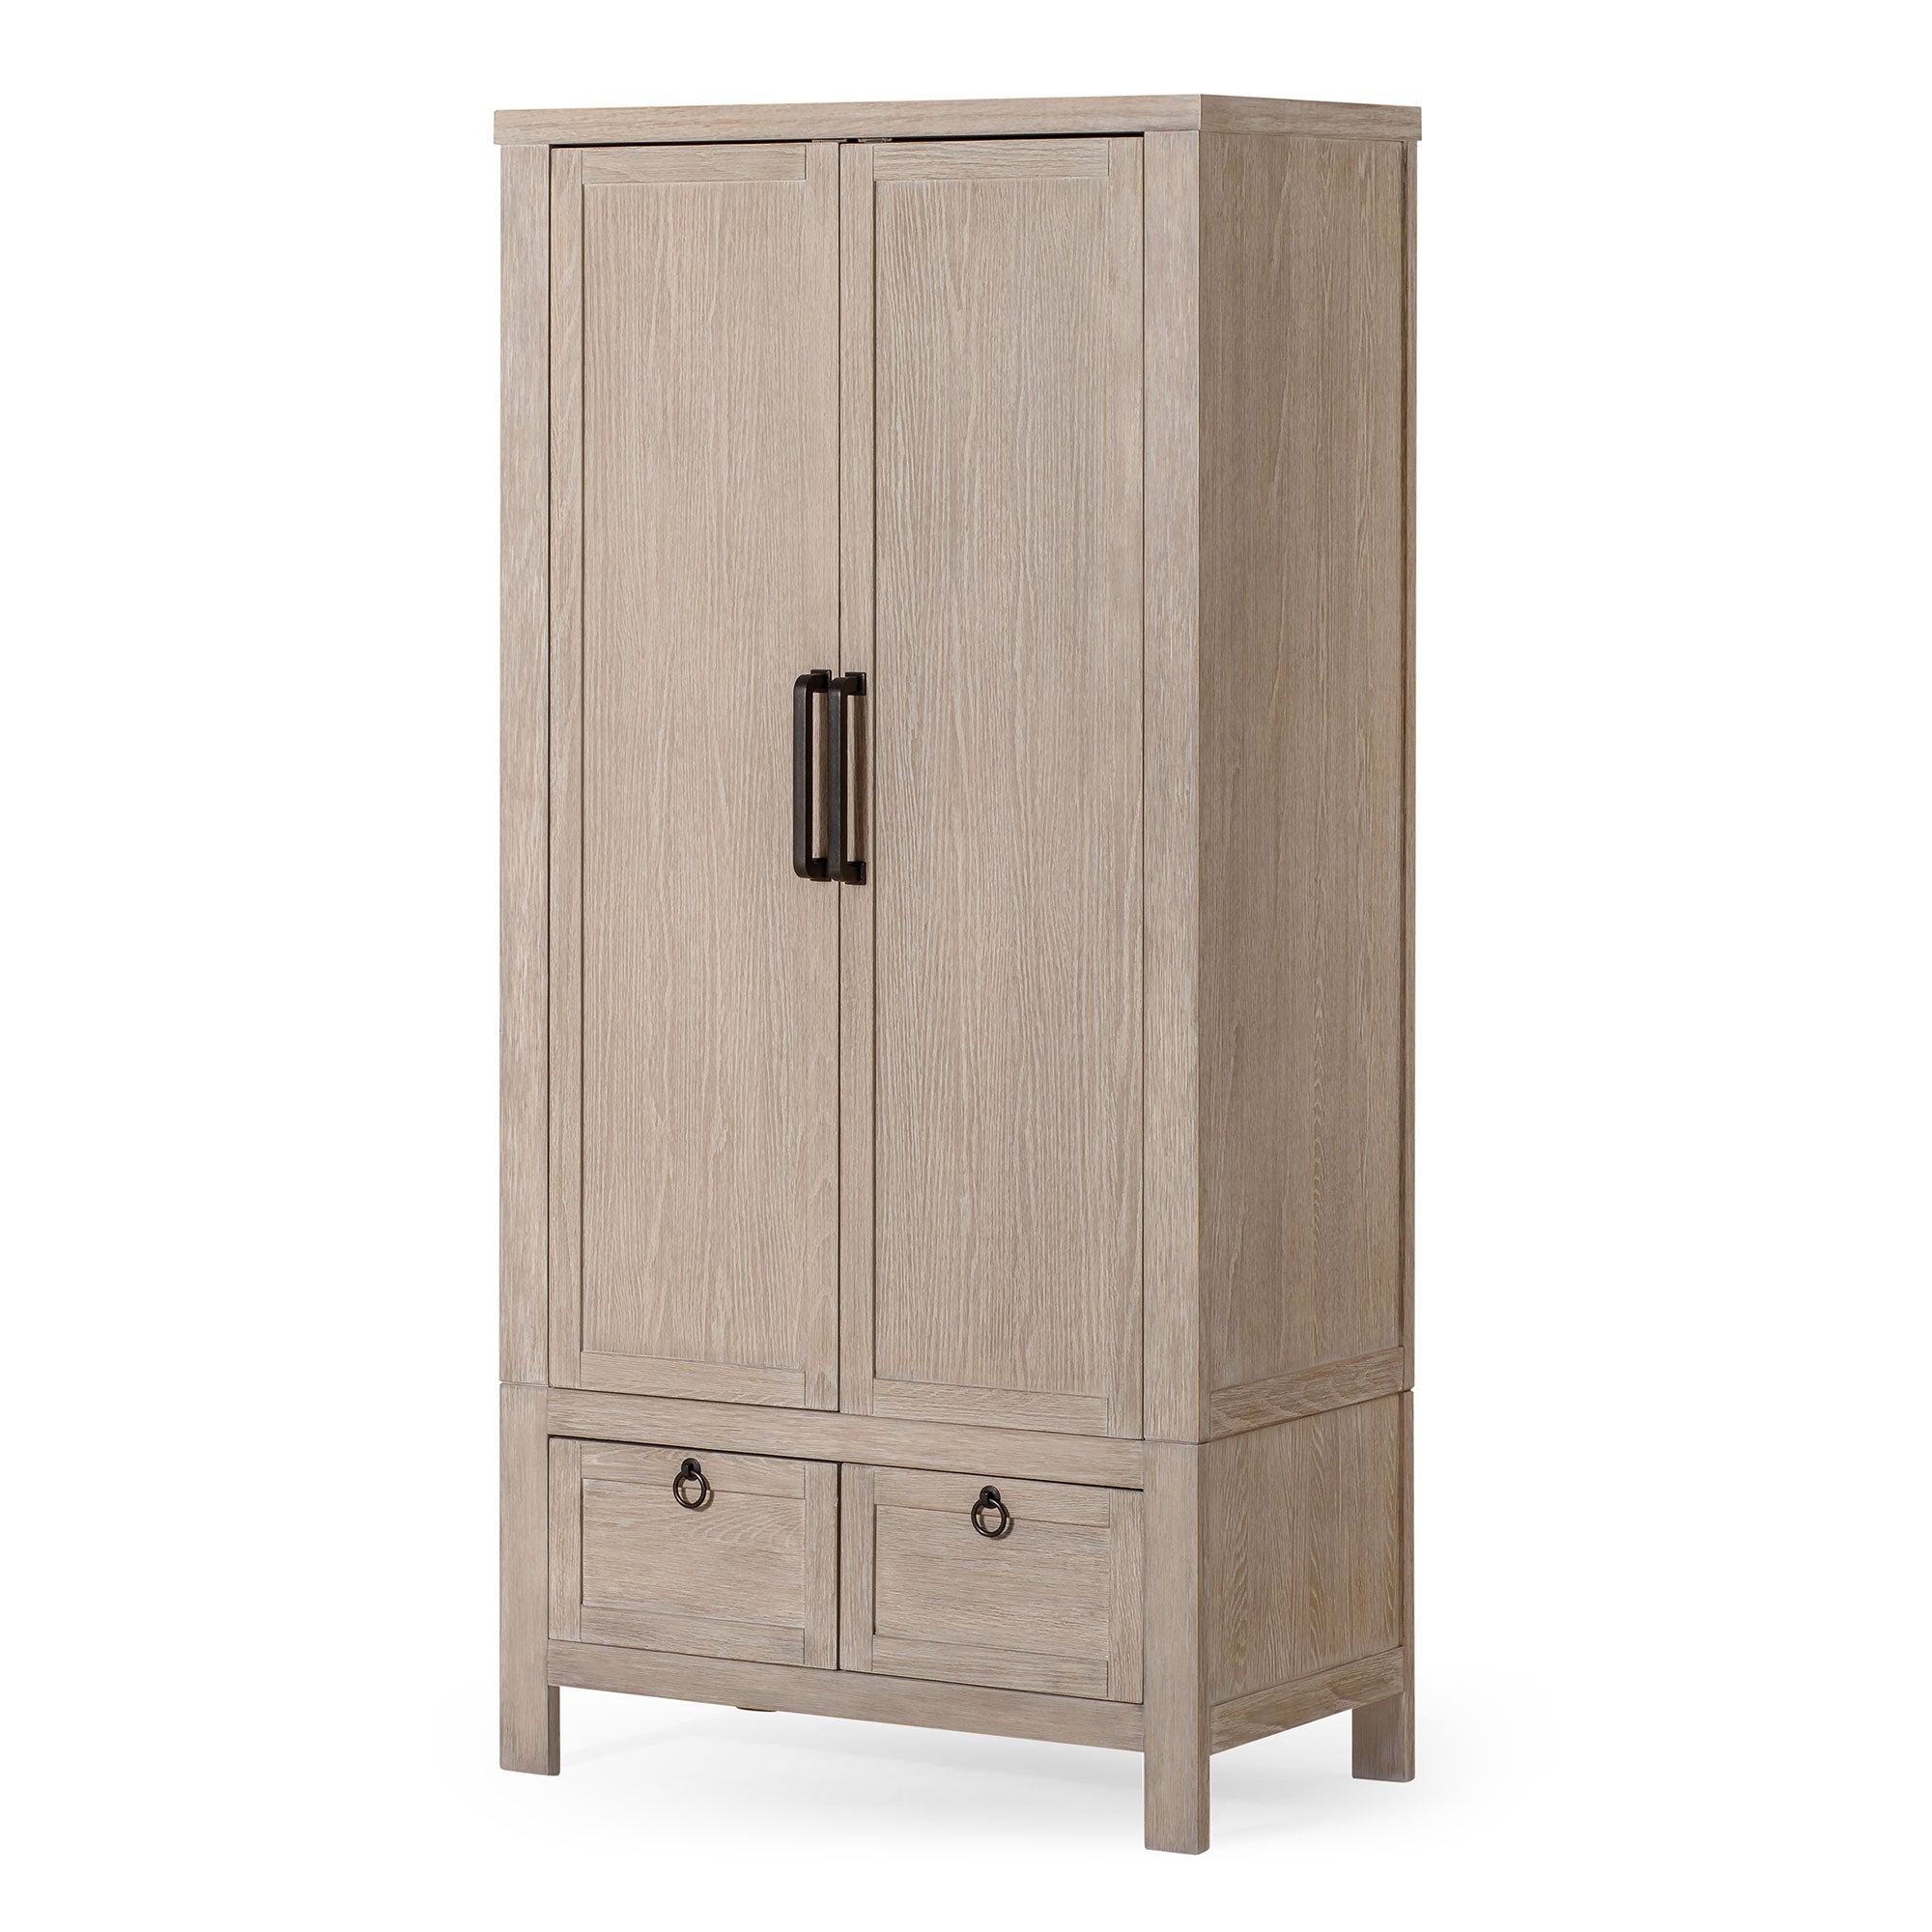 Maven-Lane-Vaughn-Rustic-Wooden-Cabinet-in-Weathered-White-Finish-China-Cabinets-&-Hutches